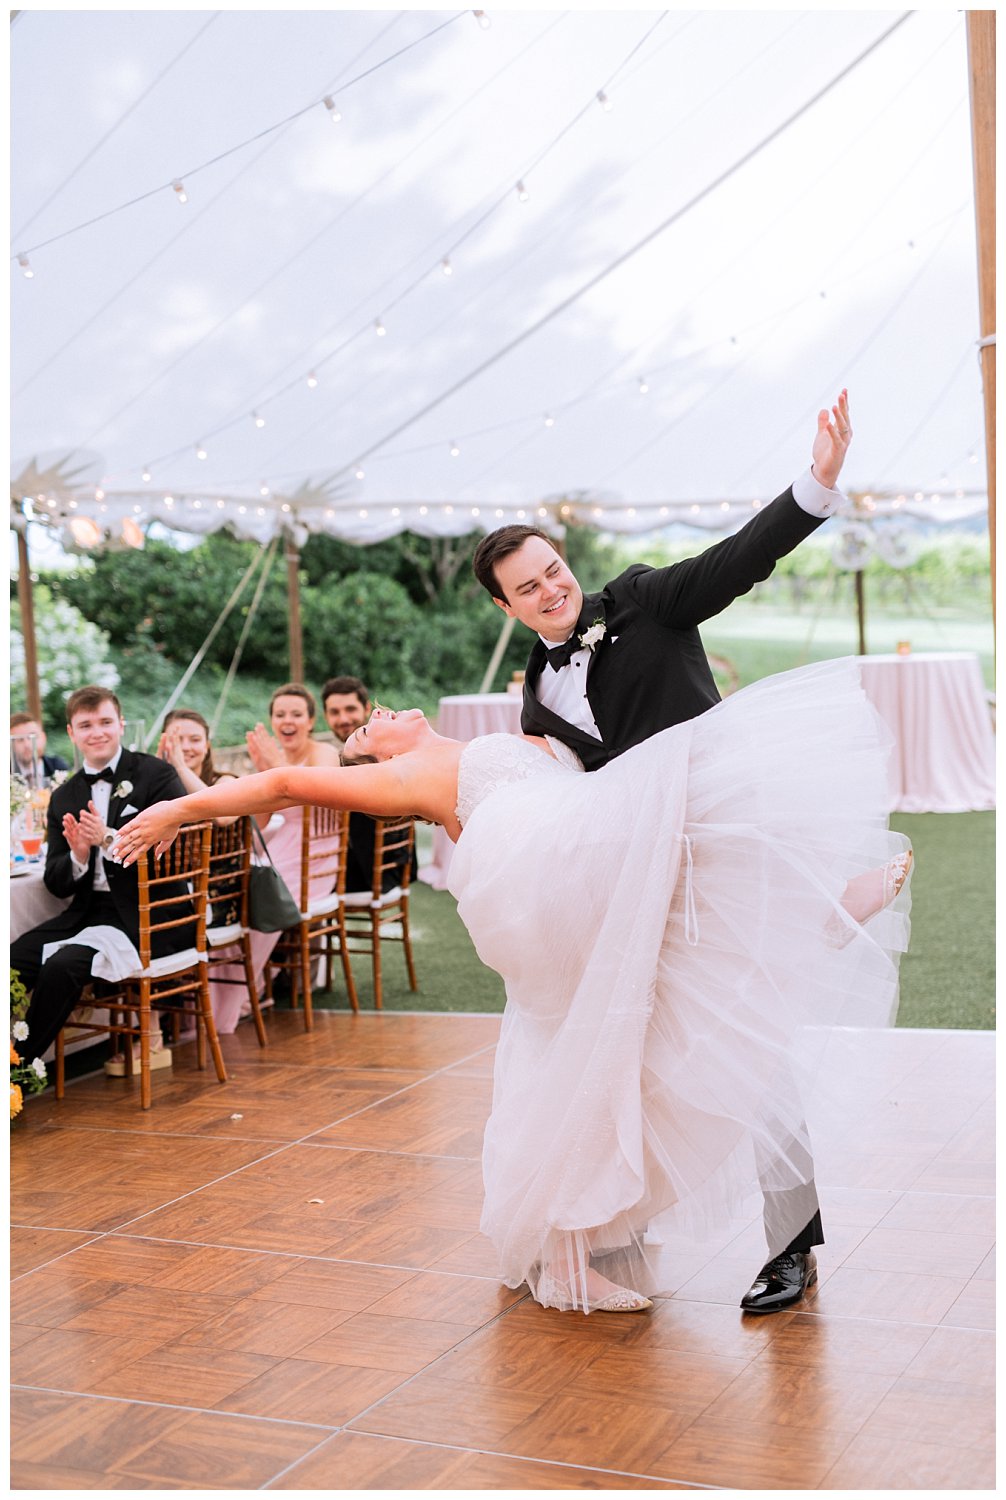 Bride and groom first dance at their colorful summer wedding in Charlottesville, Virginia